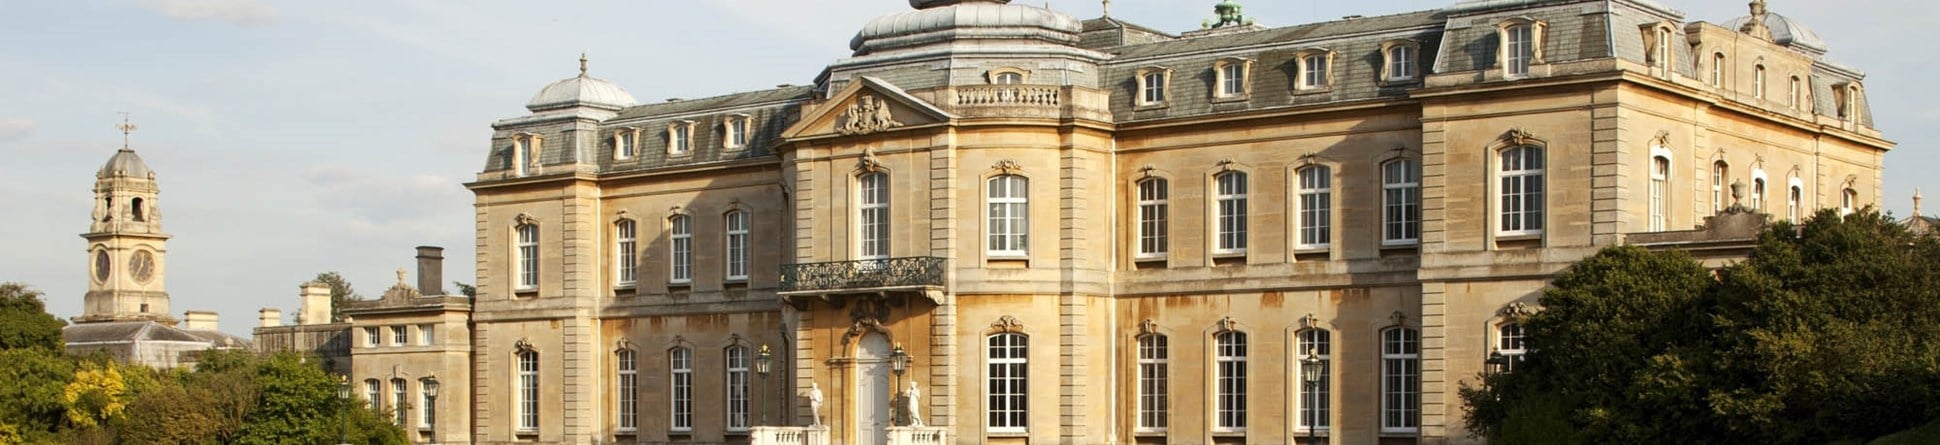 Image of Wrest Park and gardens in Bedfordshire.